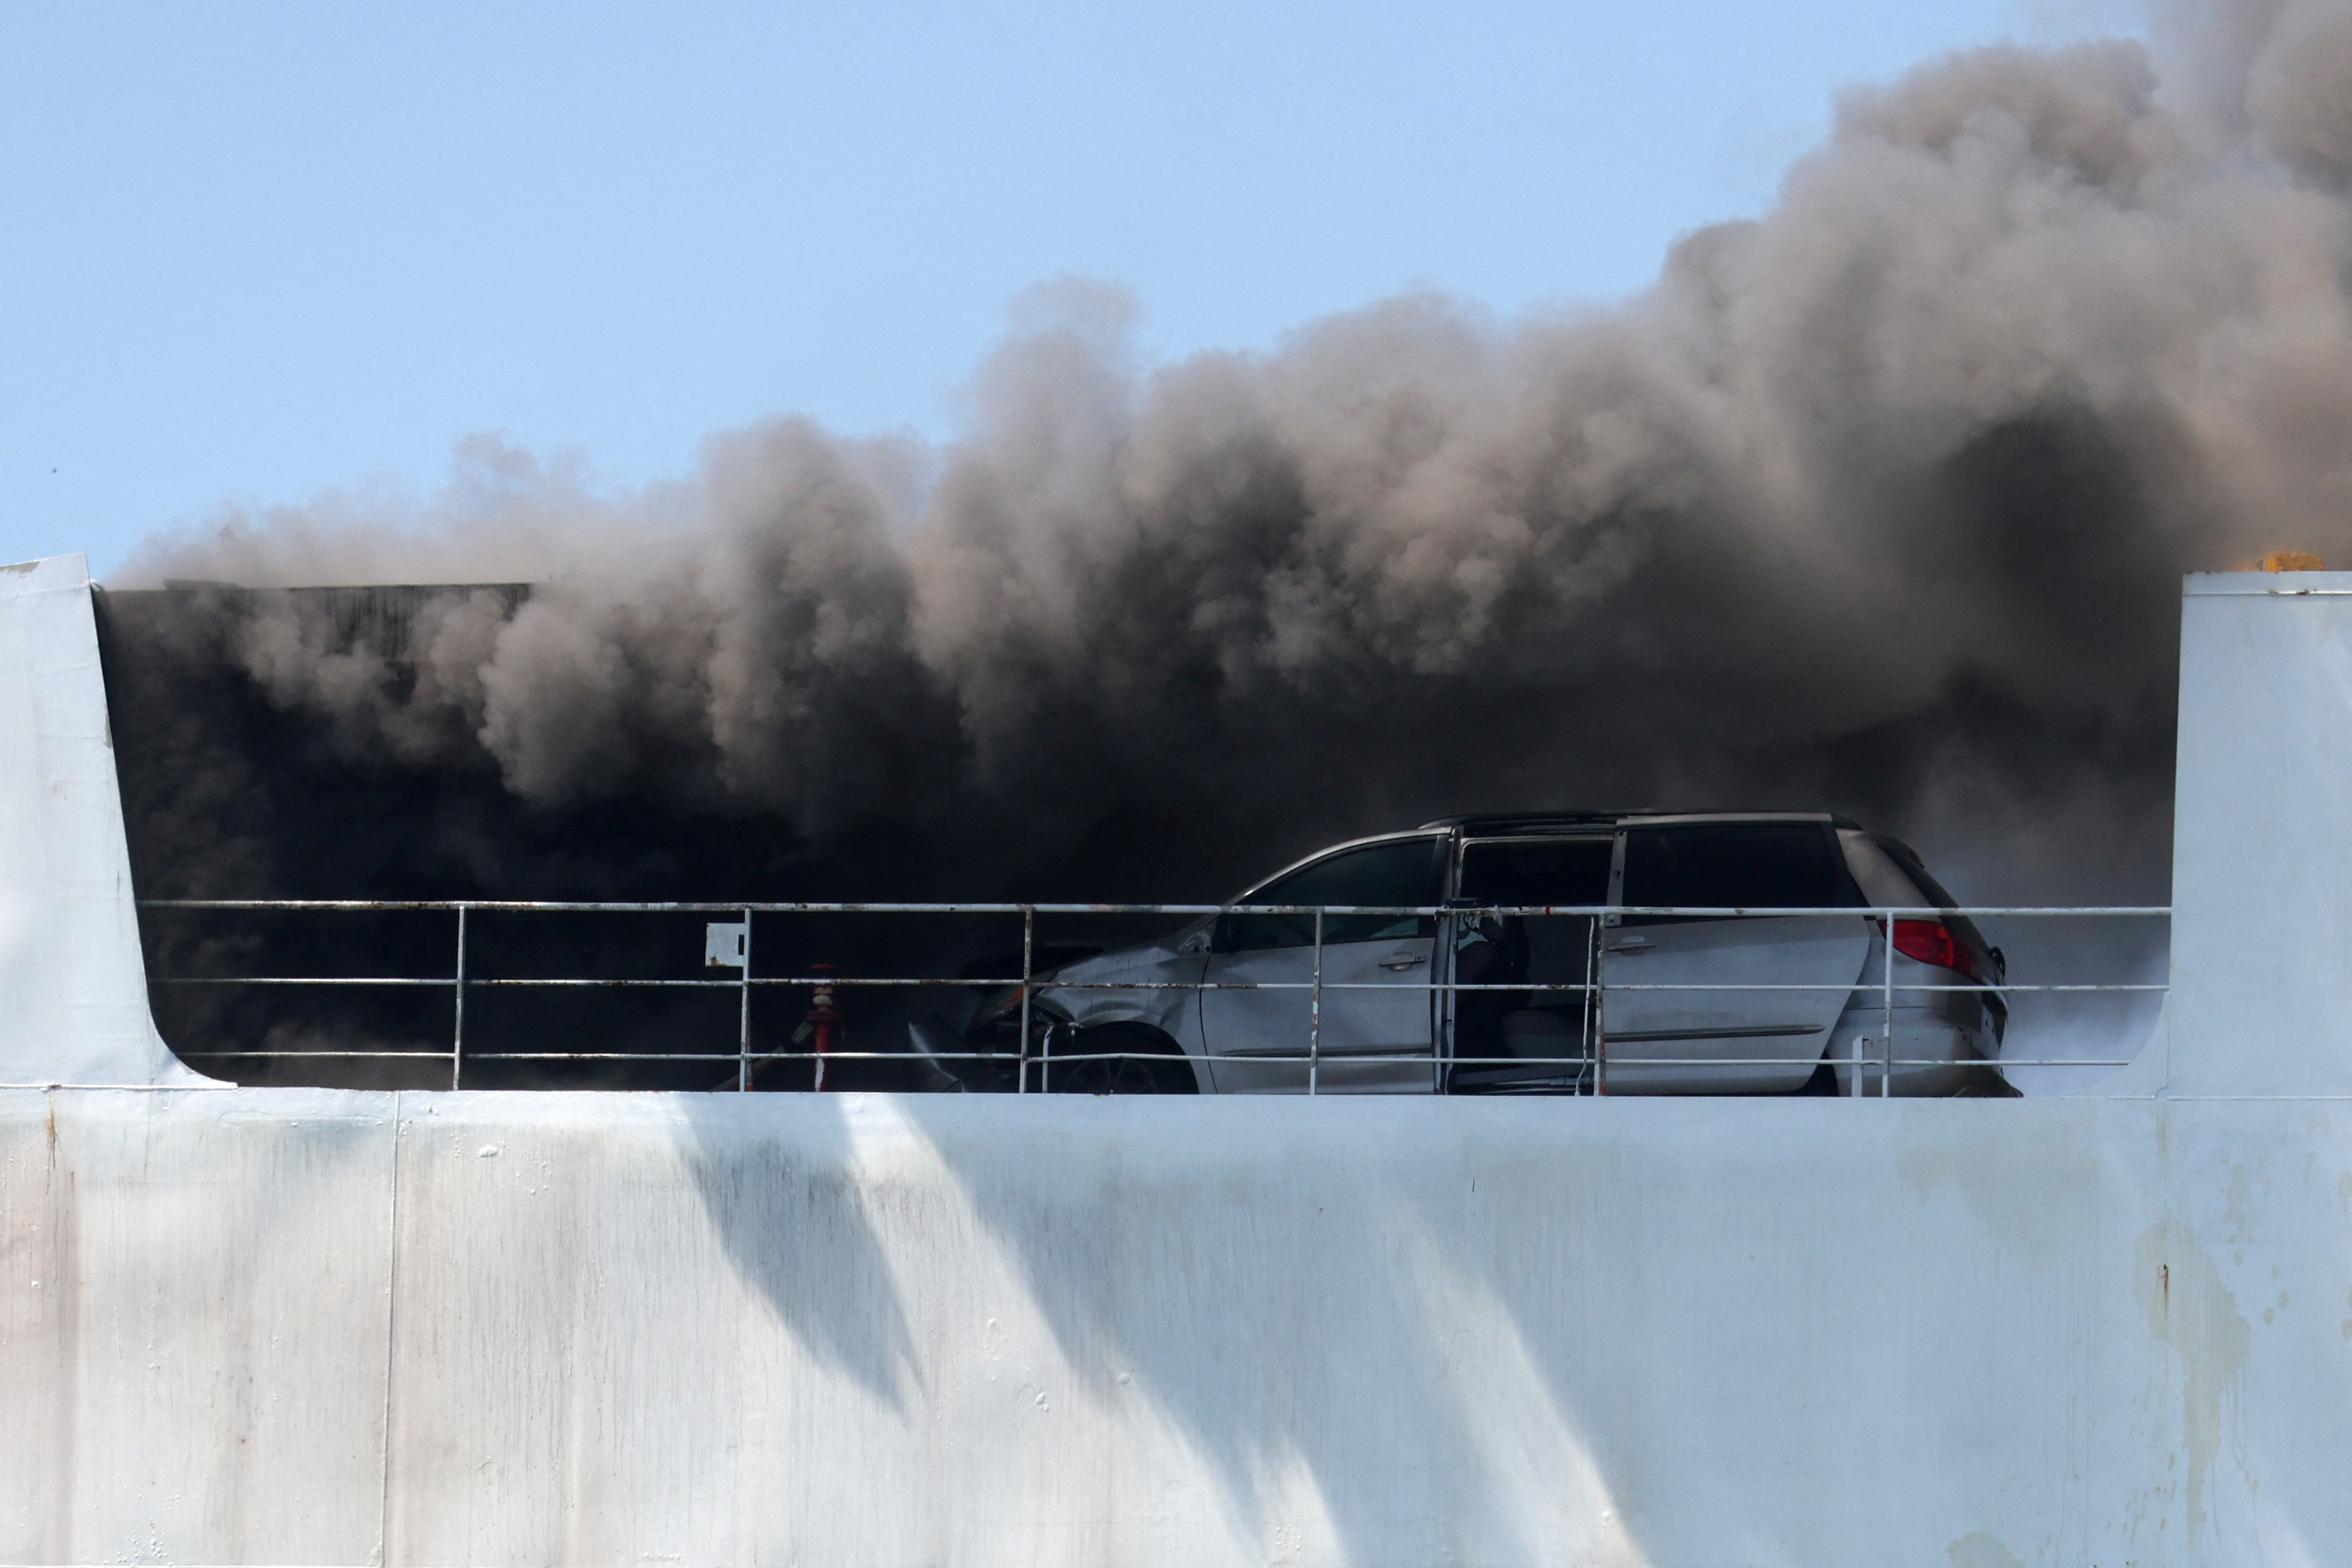 Port Newark cargo ship fire: Mourners gather for funeral of fallen